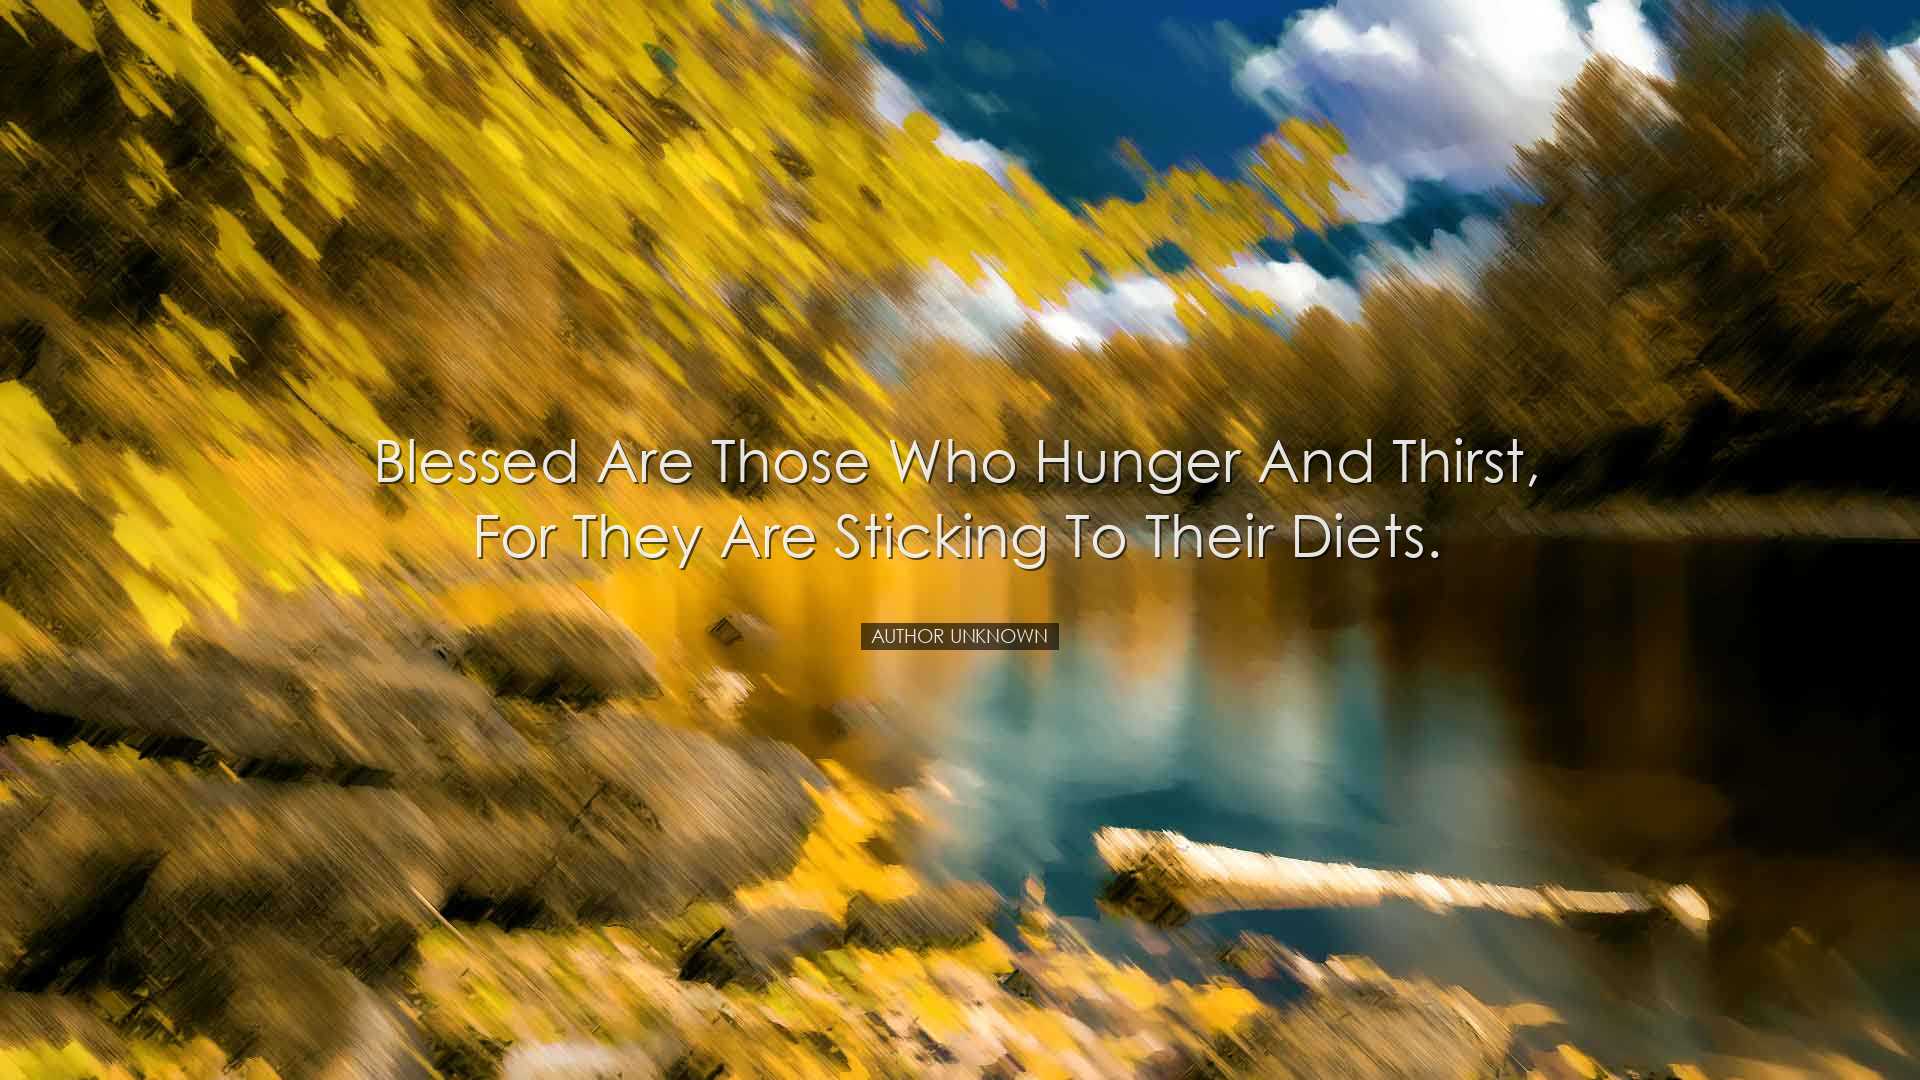 Blessed are those who hunger and thirst, for they are sticking to